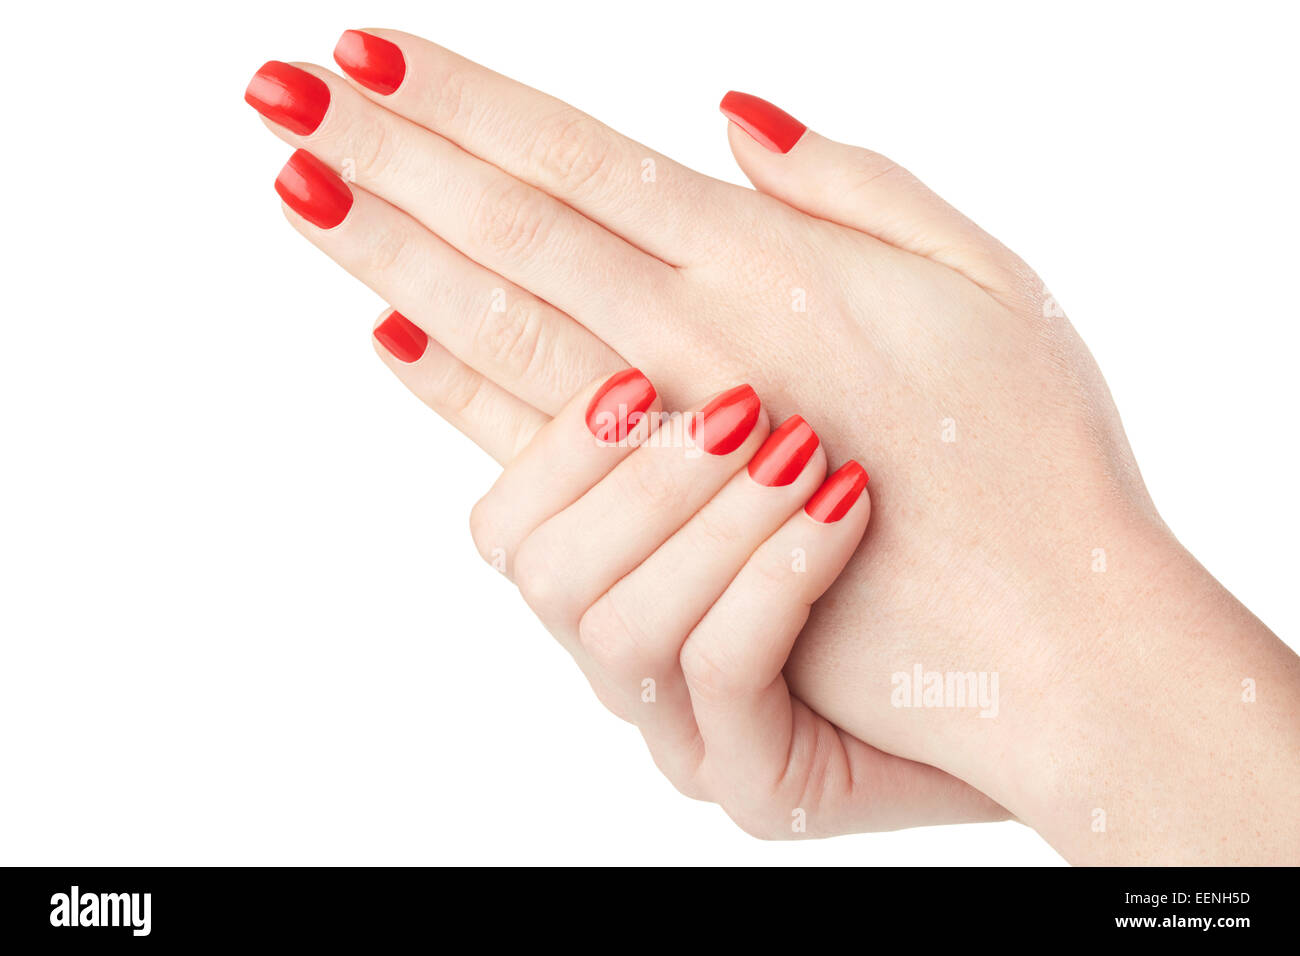 Hands With Long Artificial Manicured Nails Colored With Red Nail Polish  Stock Photo, Picture and Royalty Free Image. Image 134390564.